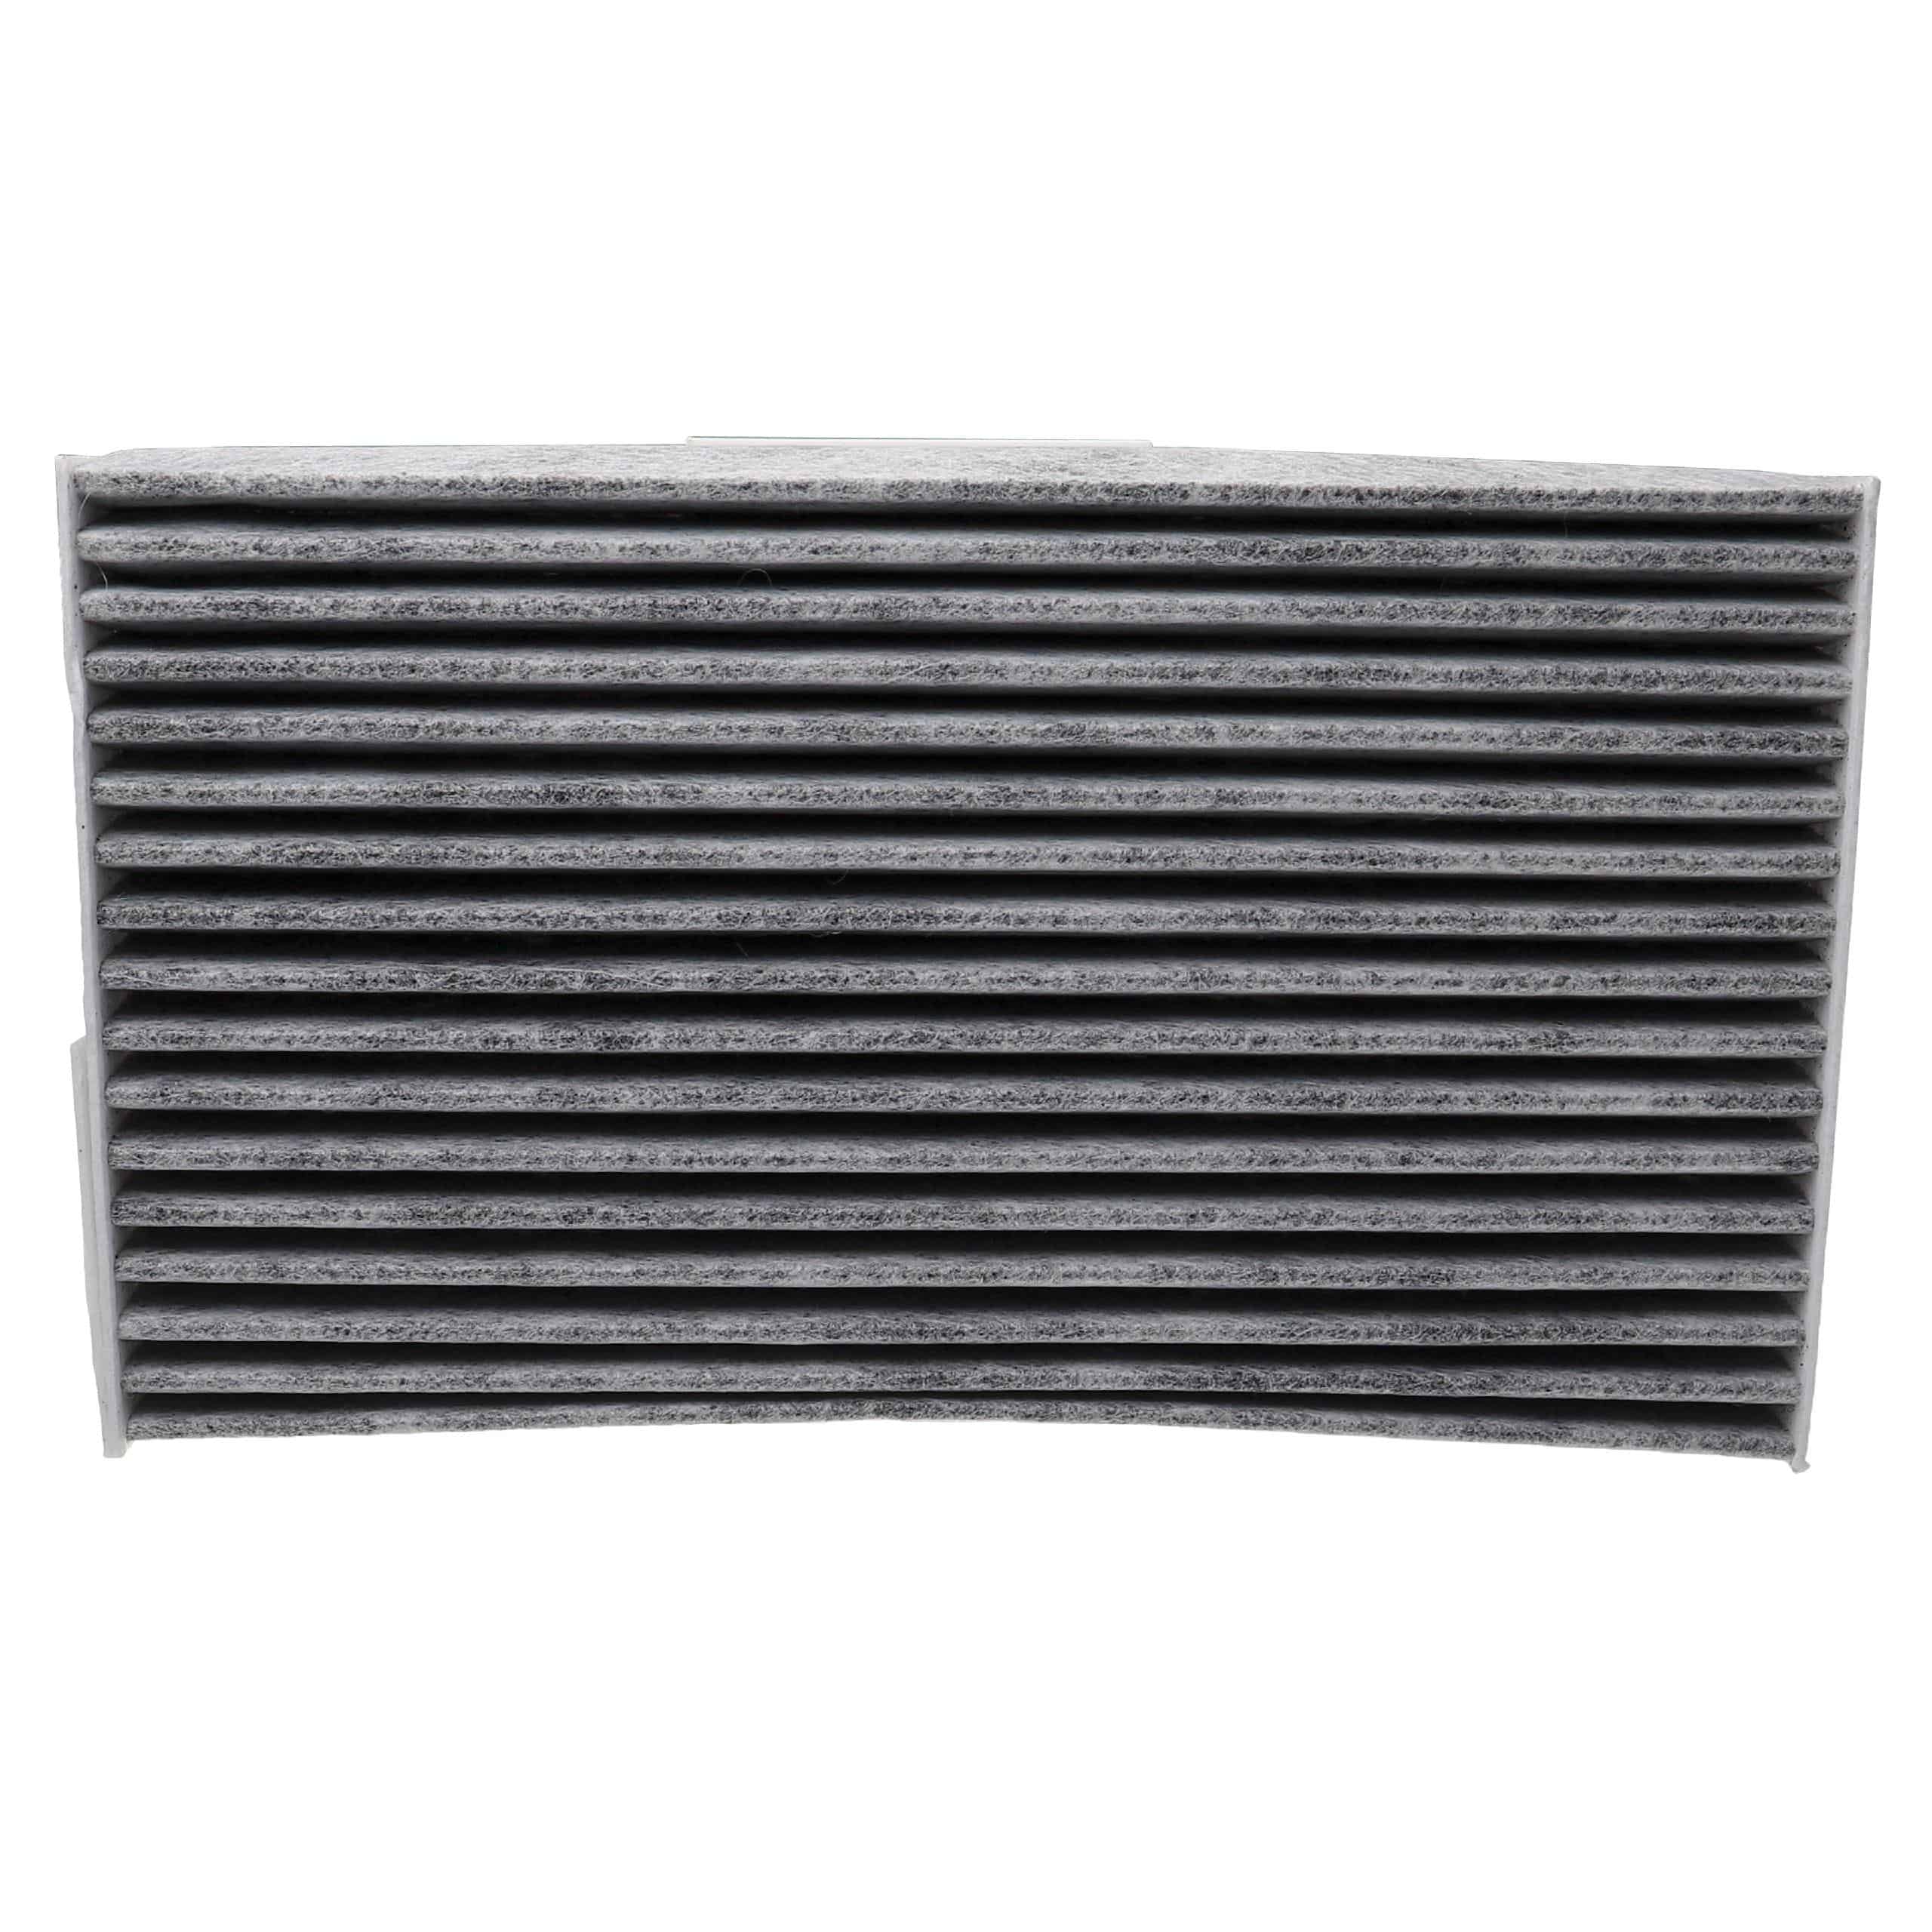 Cabin Air Filter replaces 1A First Automotive C30468 etc.